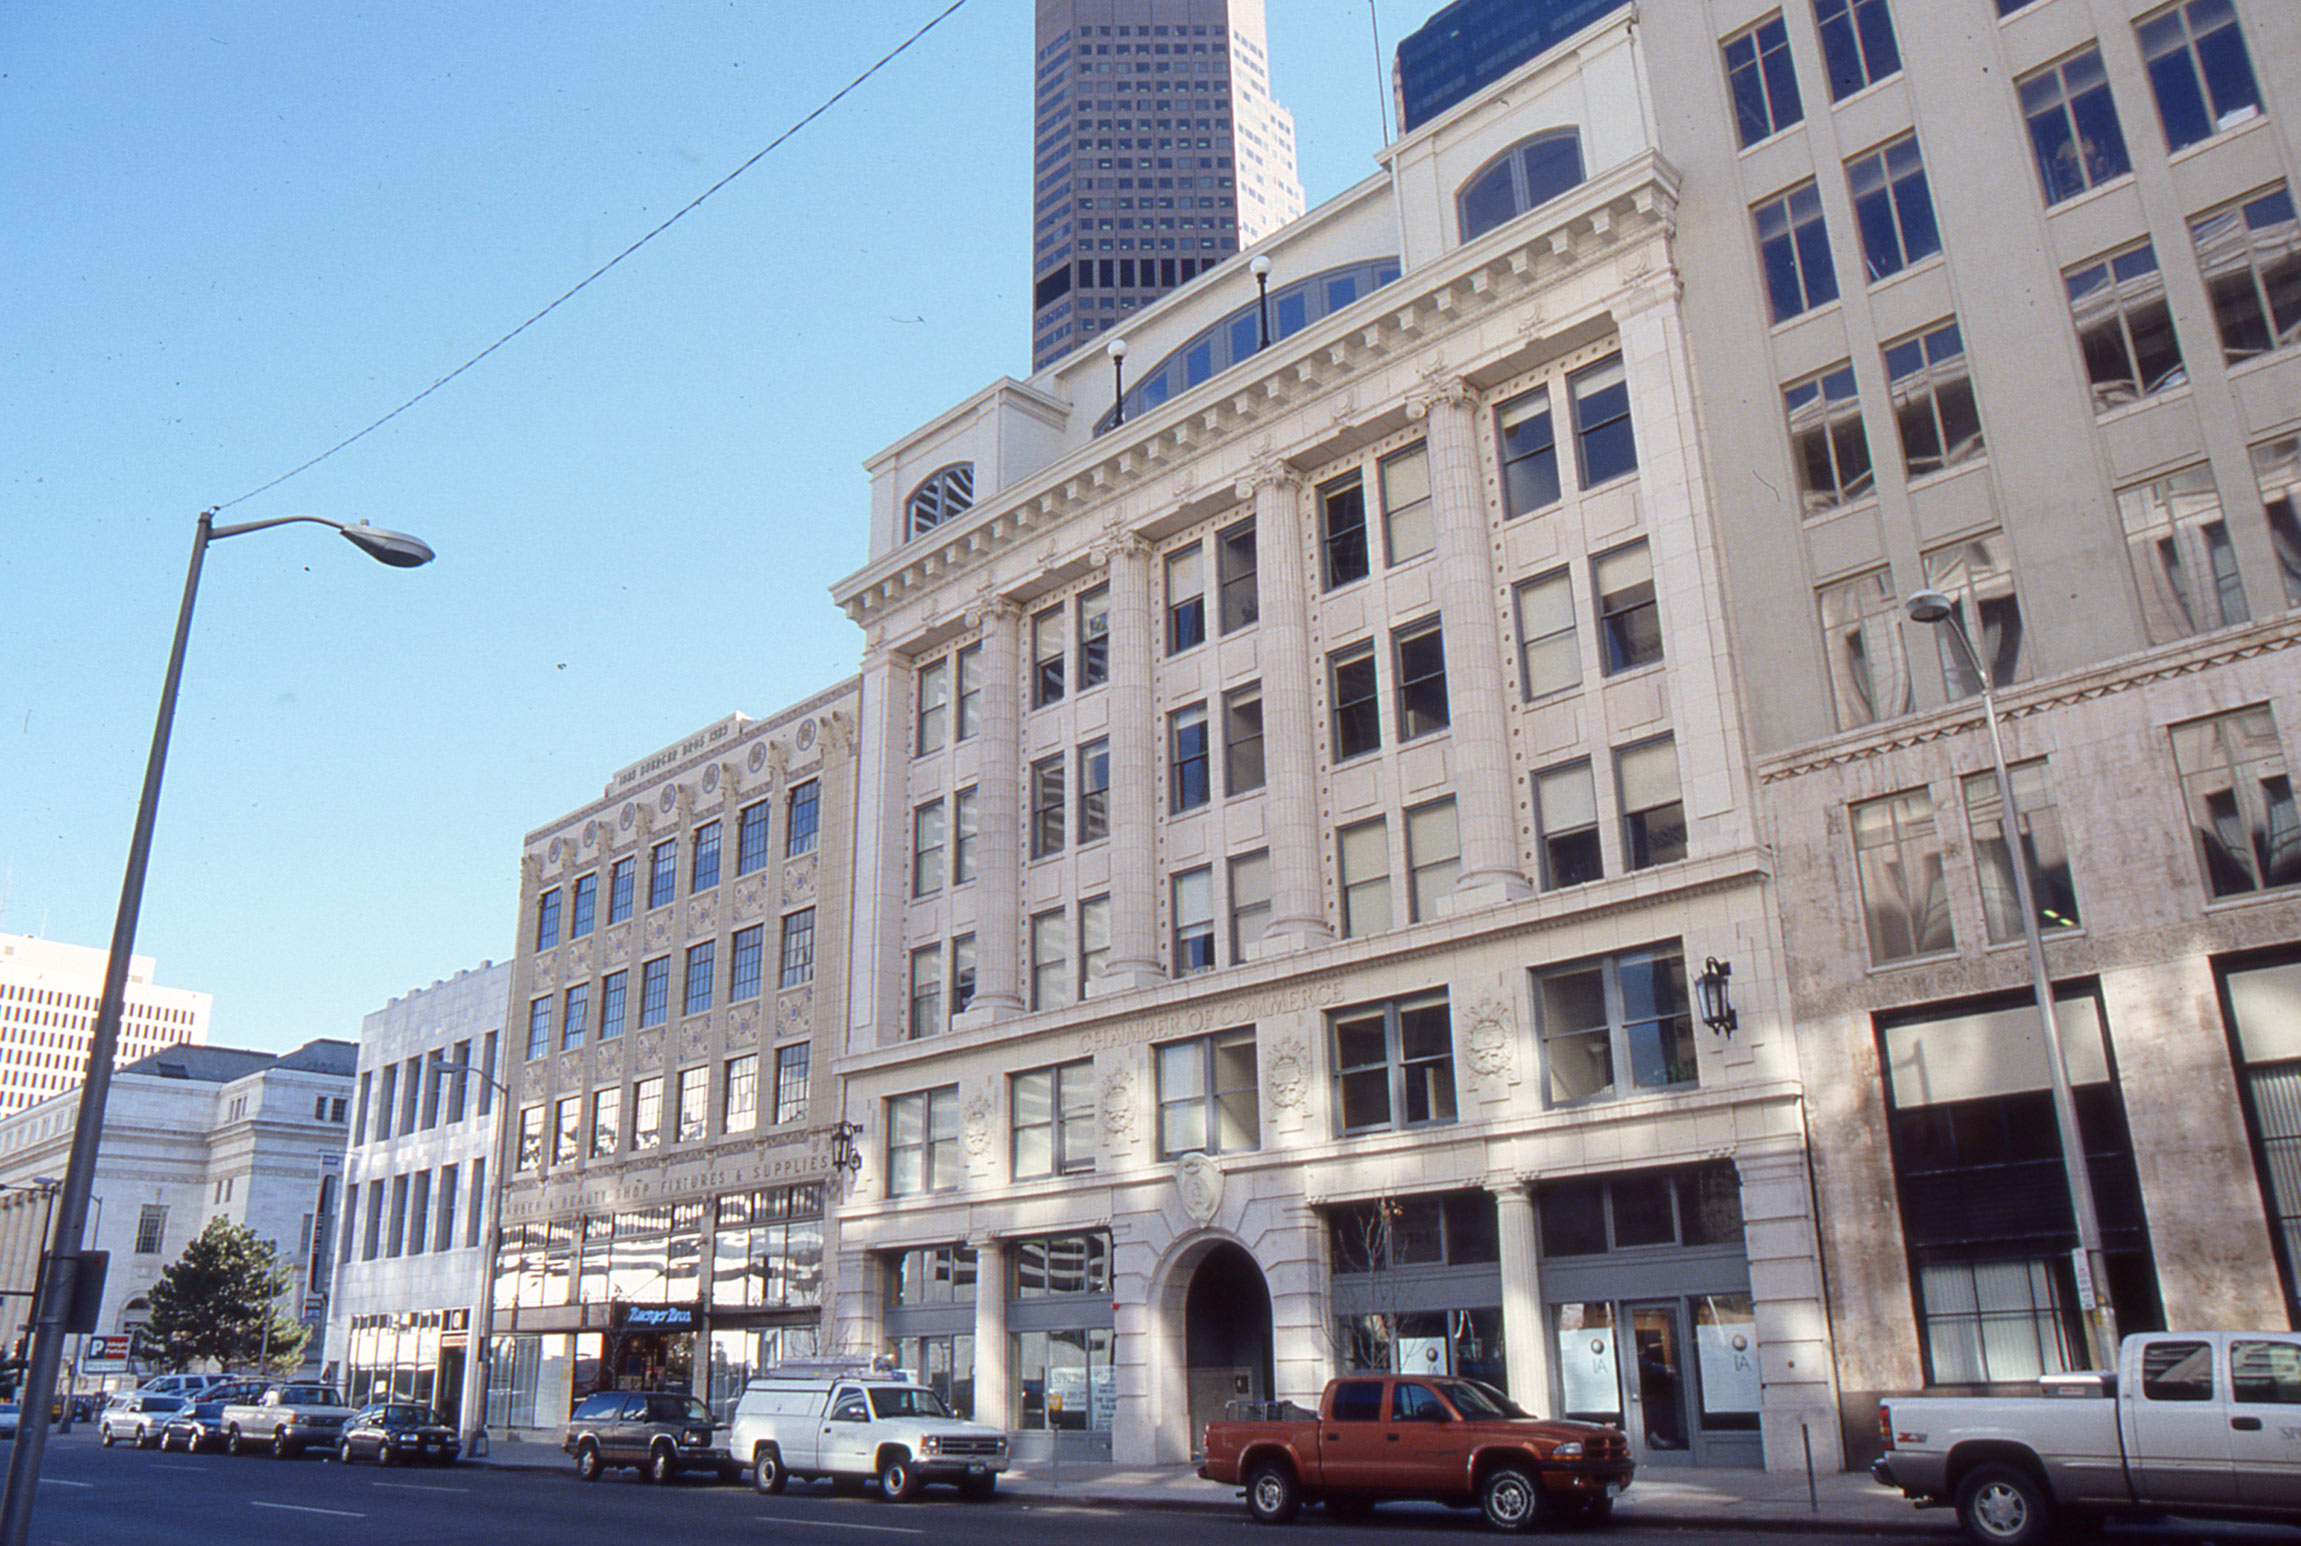 The 1700 block of Champa Street showing both the Buerger Brothers building and the Chamber of Commerce Building.